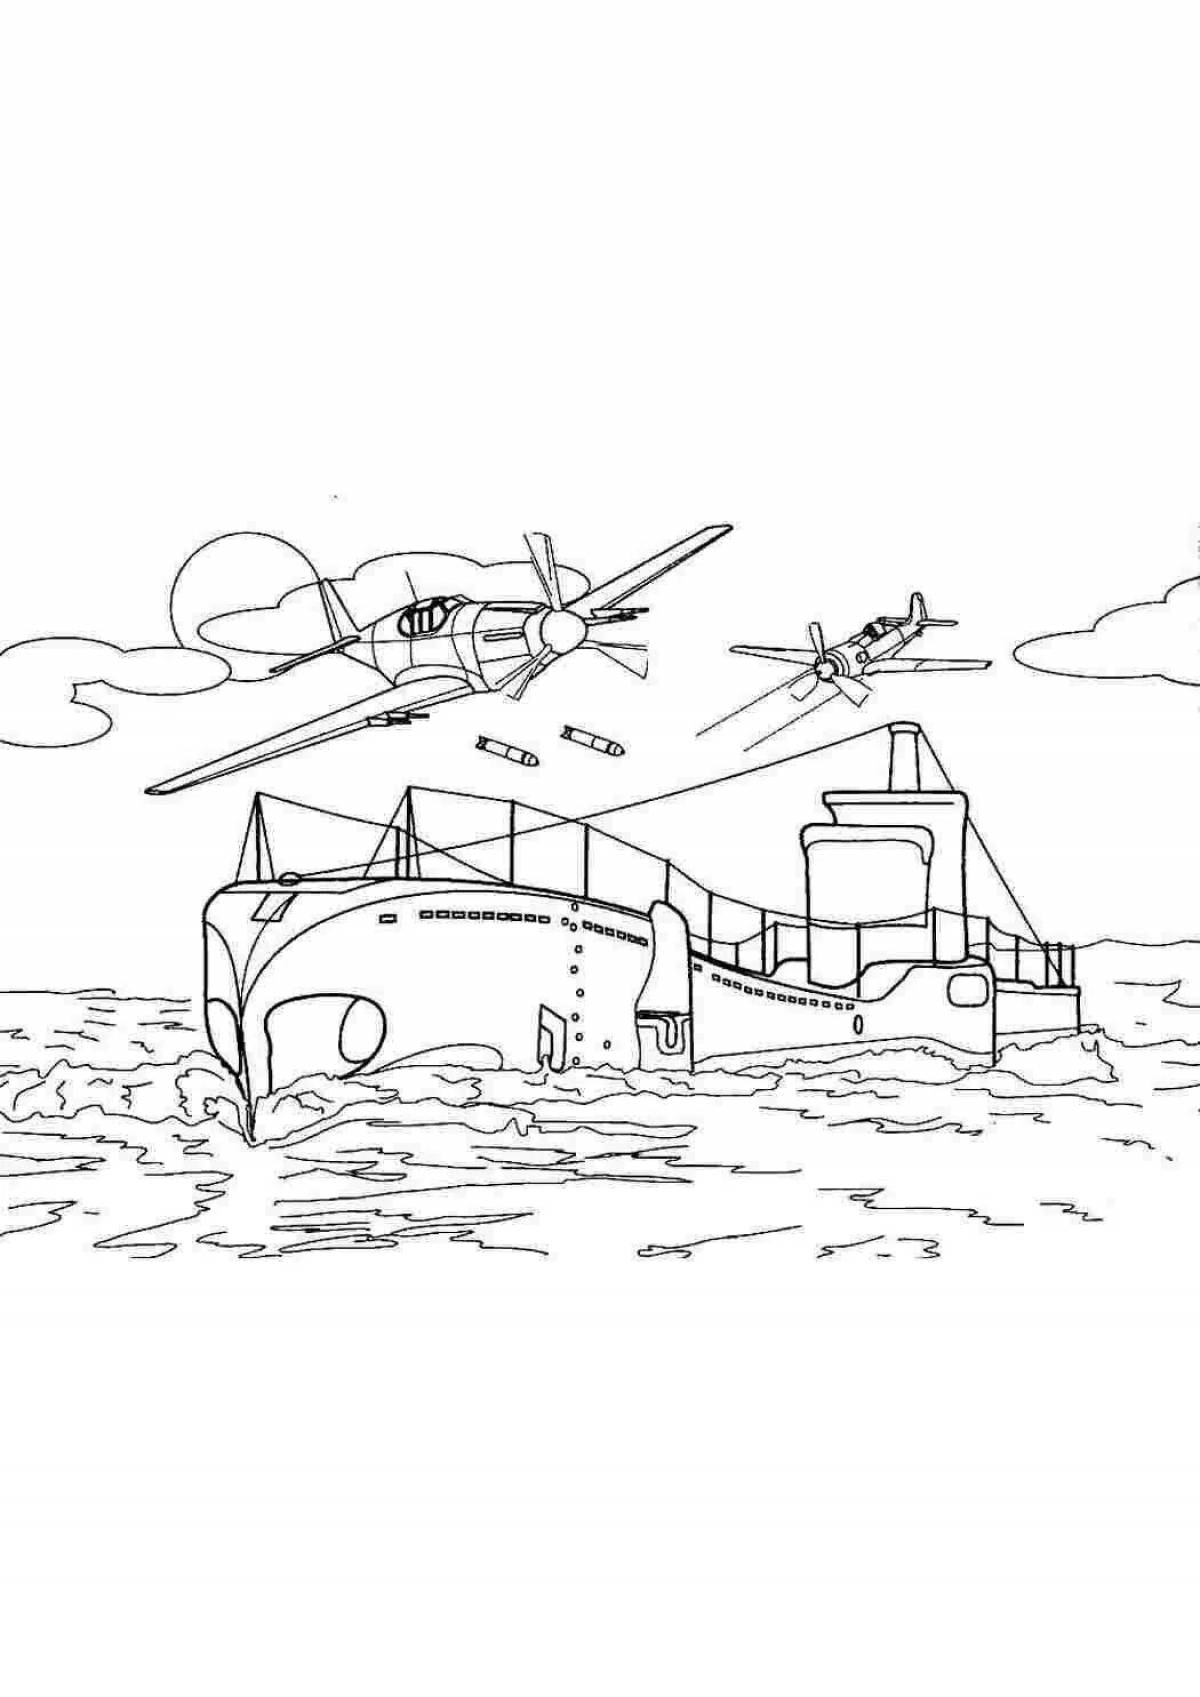 Fabulous submarine coloring book for kids